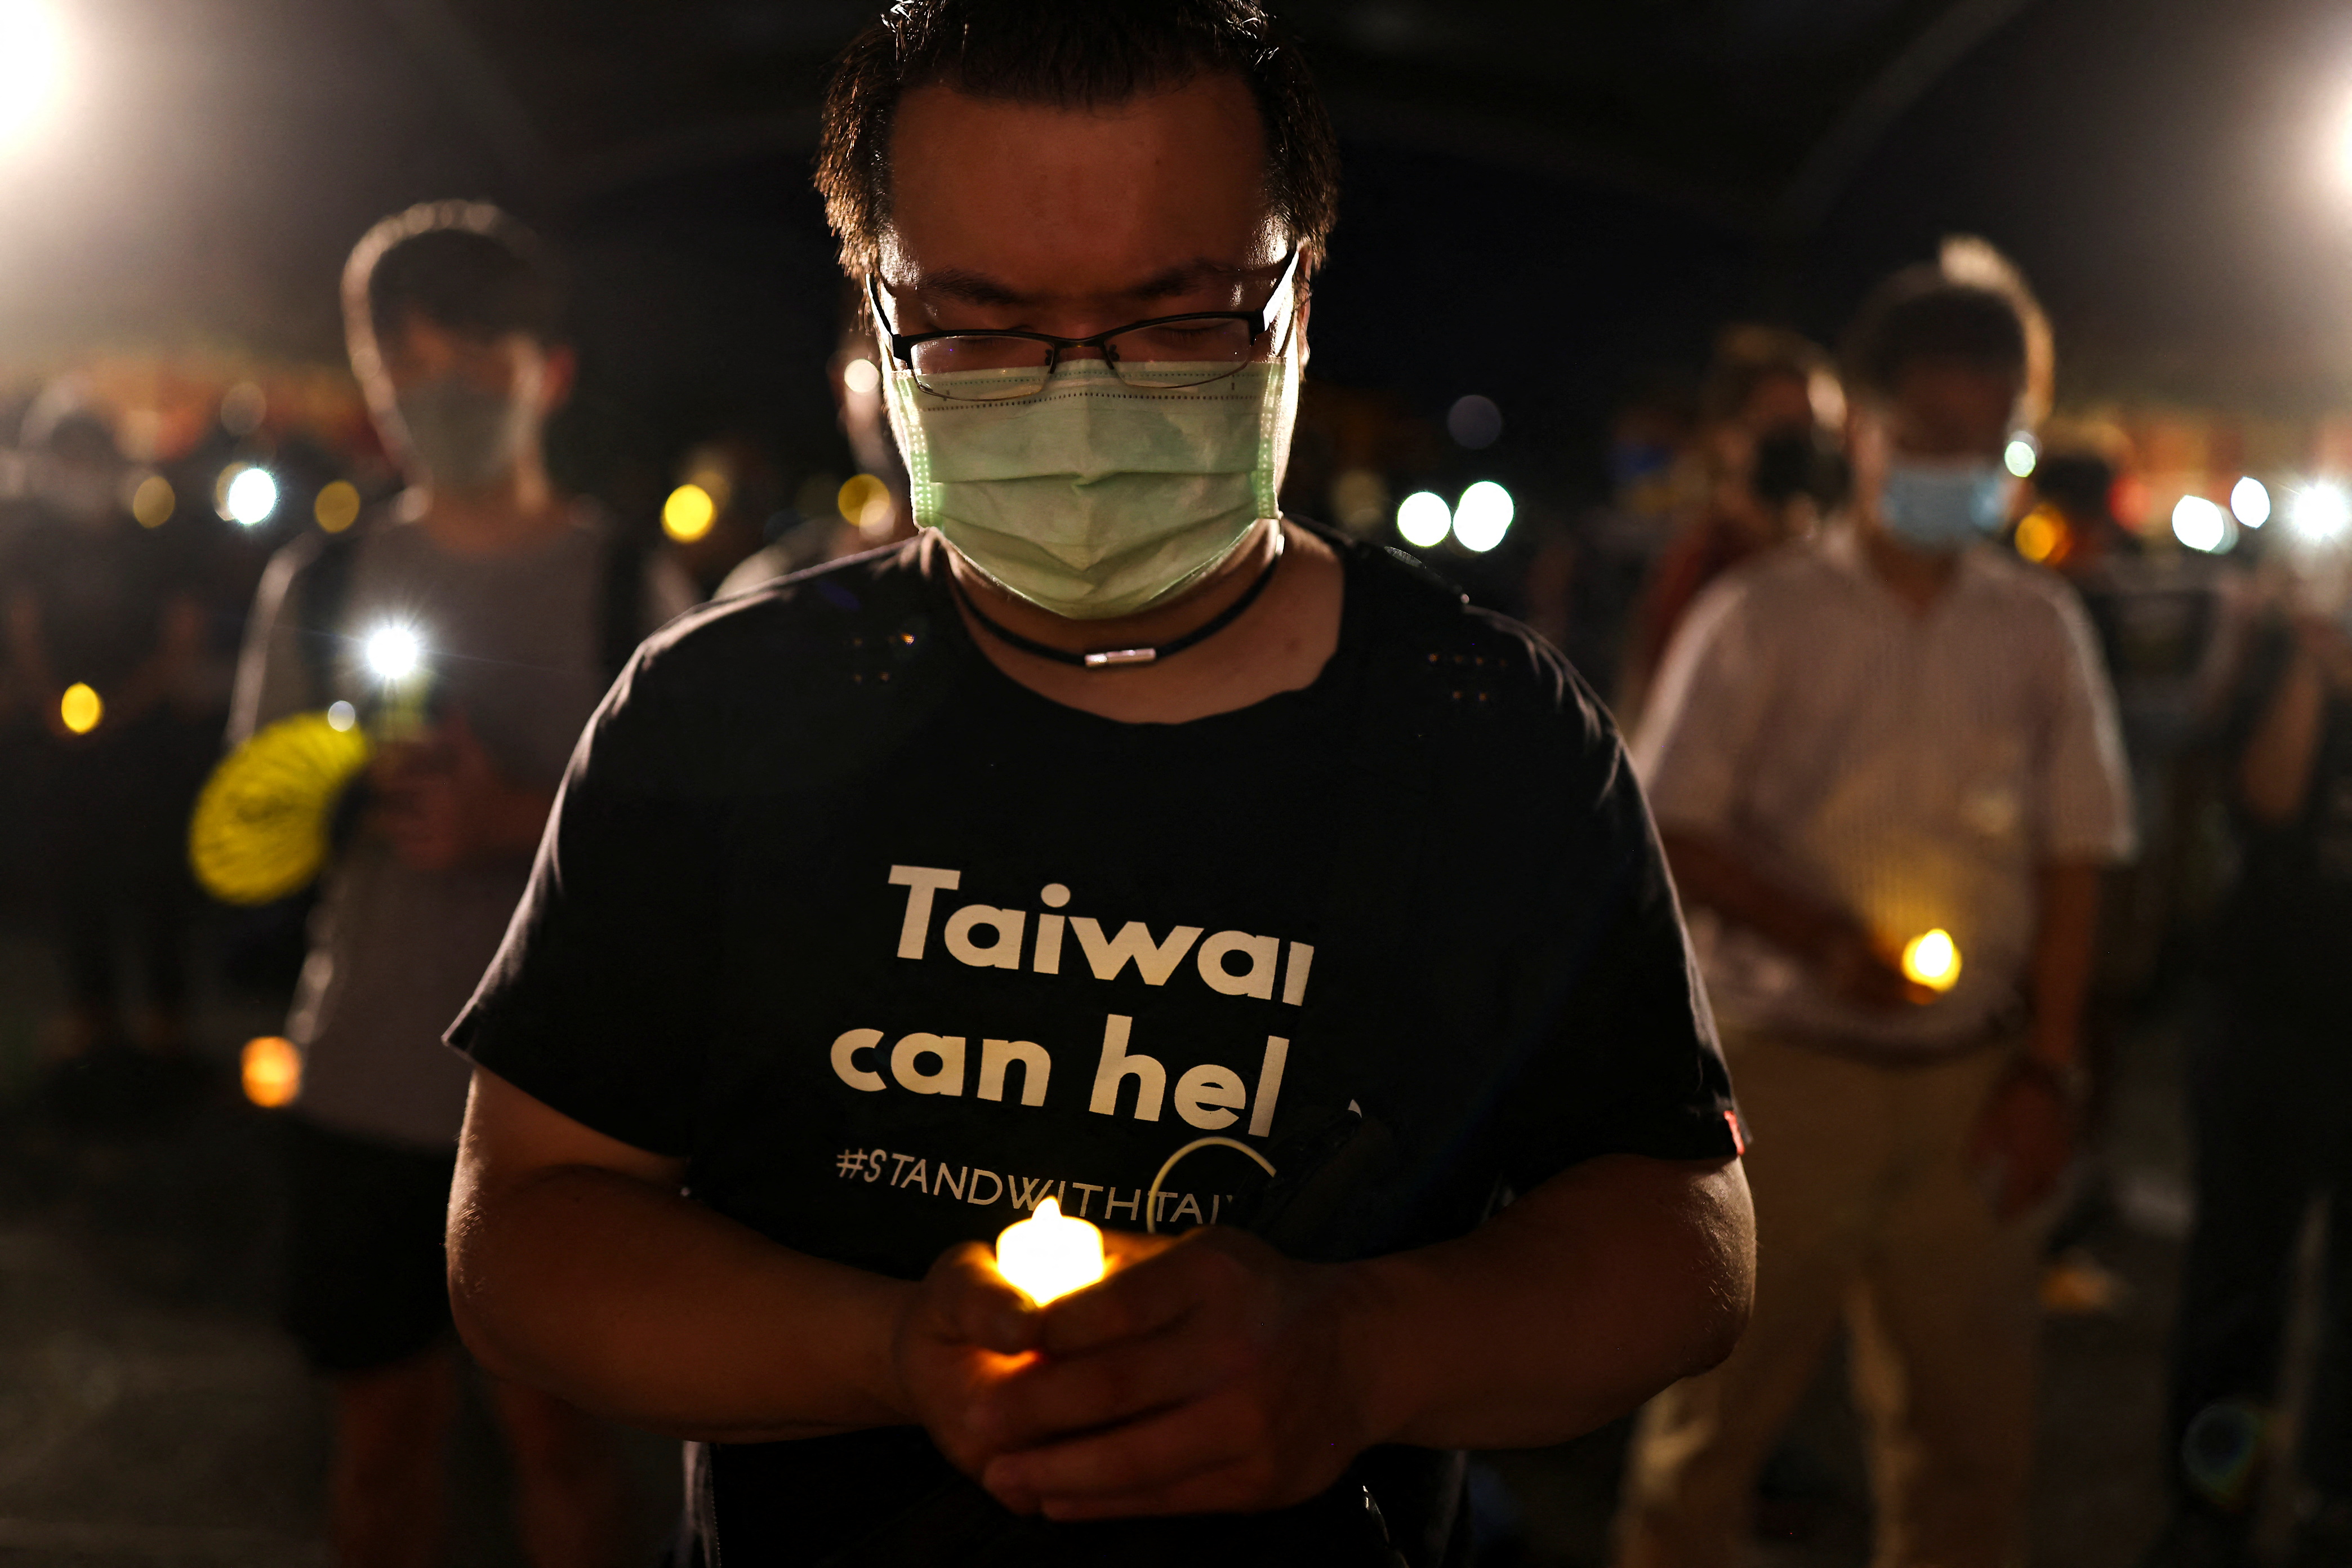 Taiwanese gather to commemorate the 33rd anniversary of Beijing's Tiananmen crackdown in Taipei